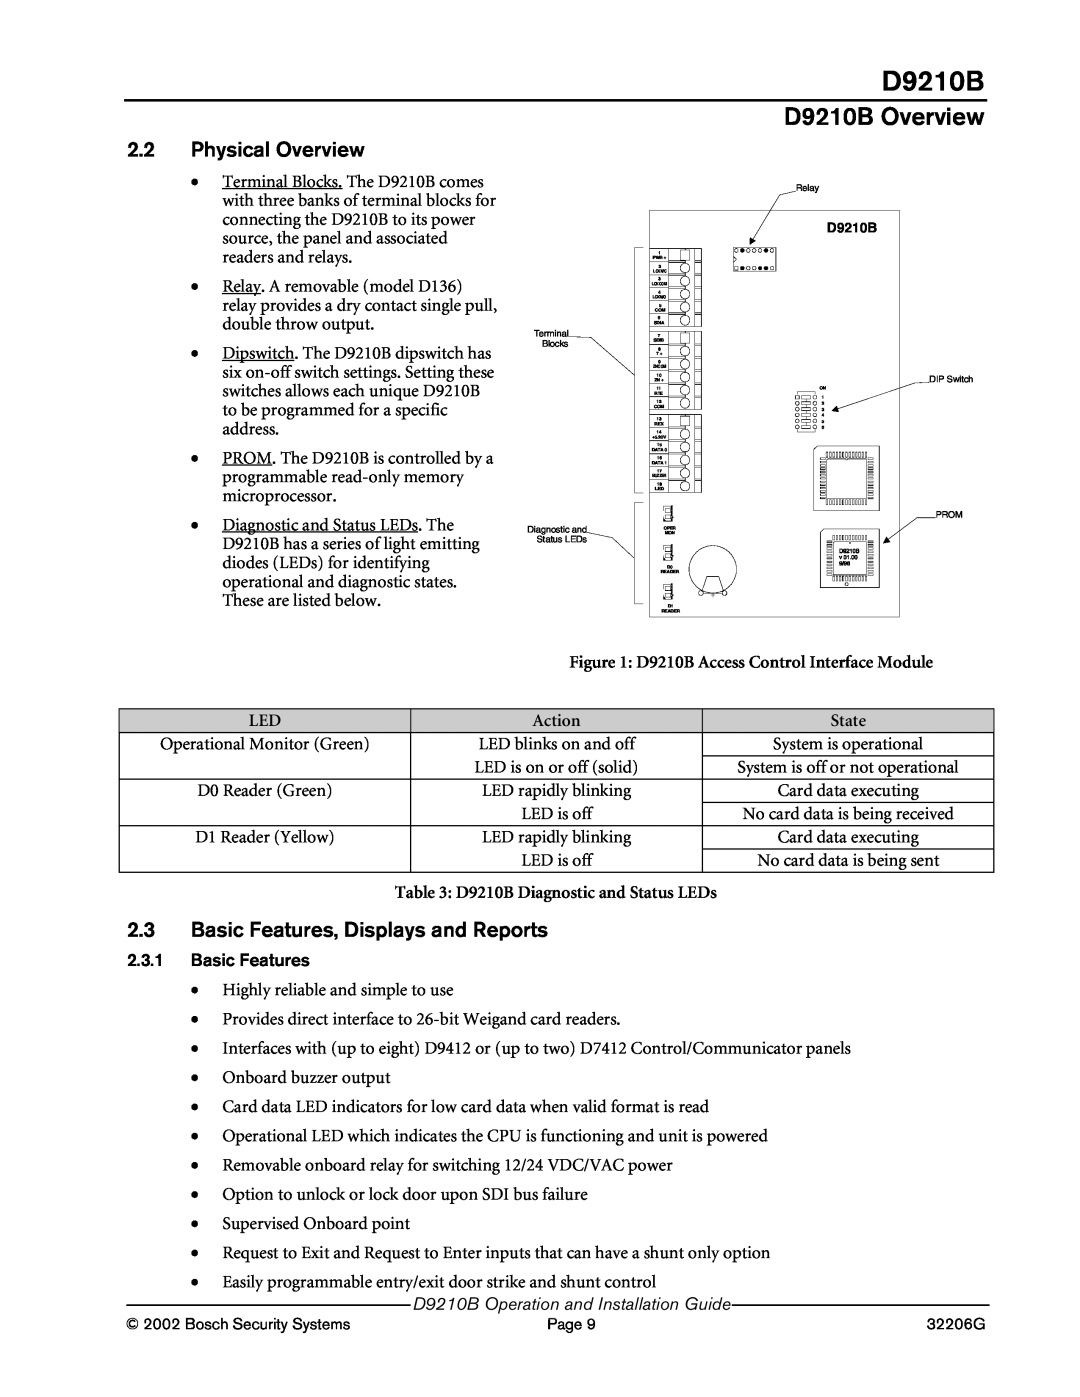 Bosch Appliances Physical Overview, Basic Features, Displays and Reports, D9210B Access Control Interface Module, State 